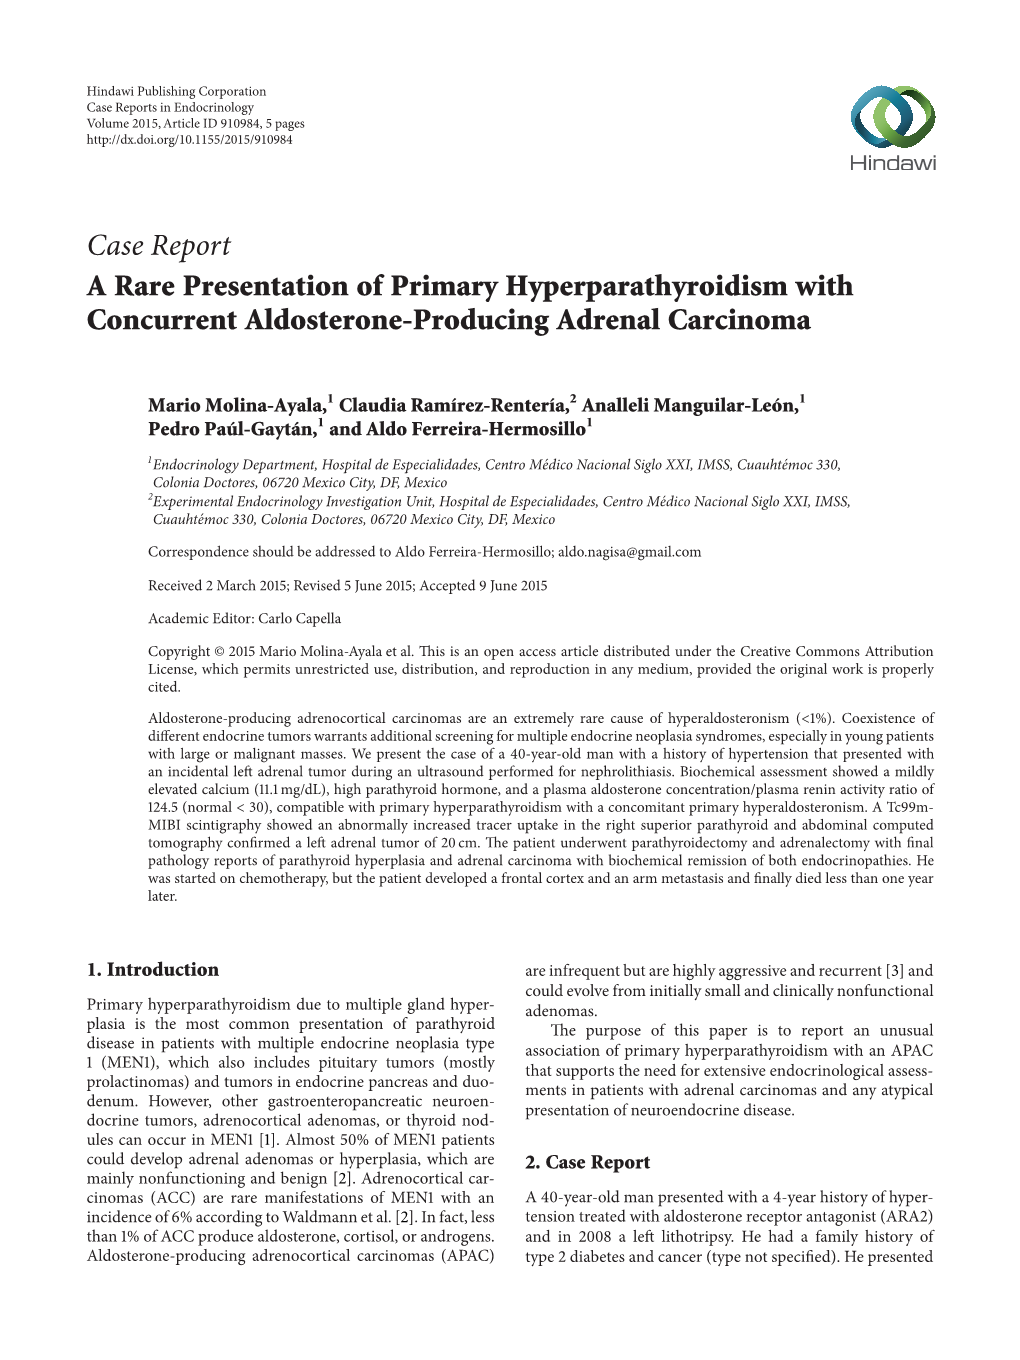 A Rare Presentation of Primary Hyperparathyroidism with Concurrent Aldosterone-Producing Adrenal Carcinoma